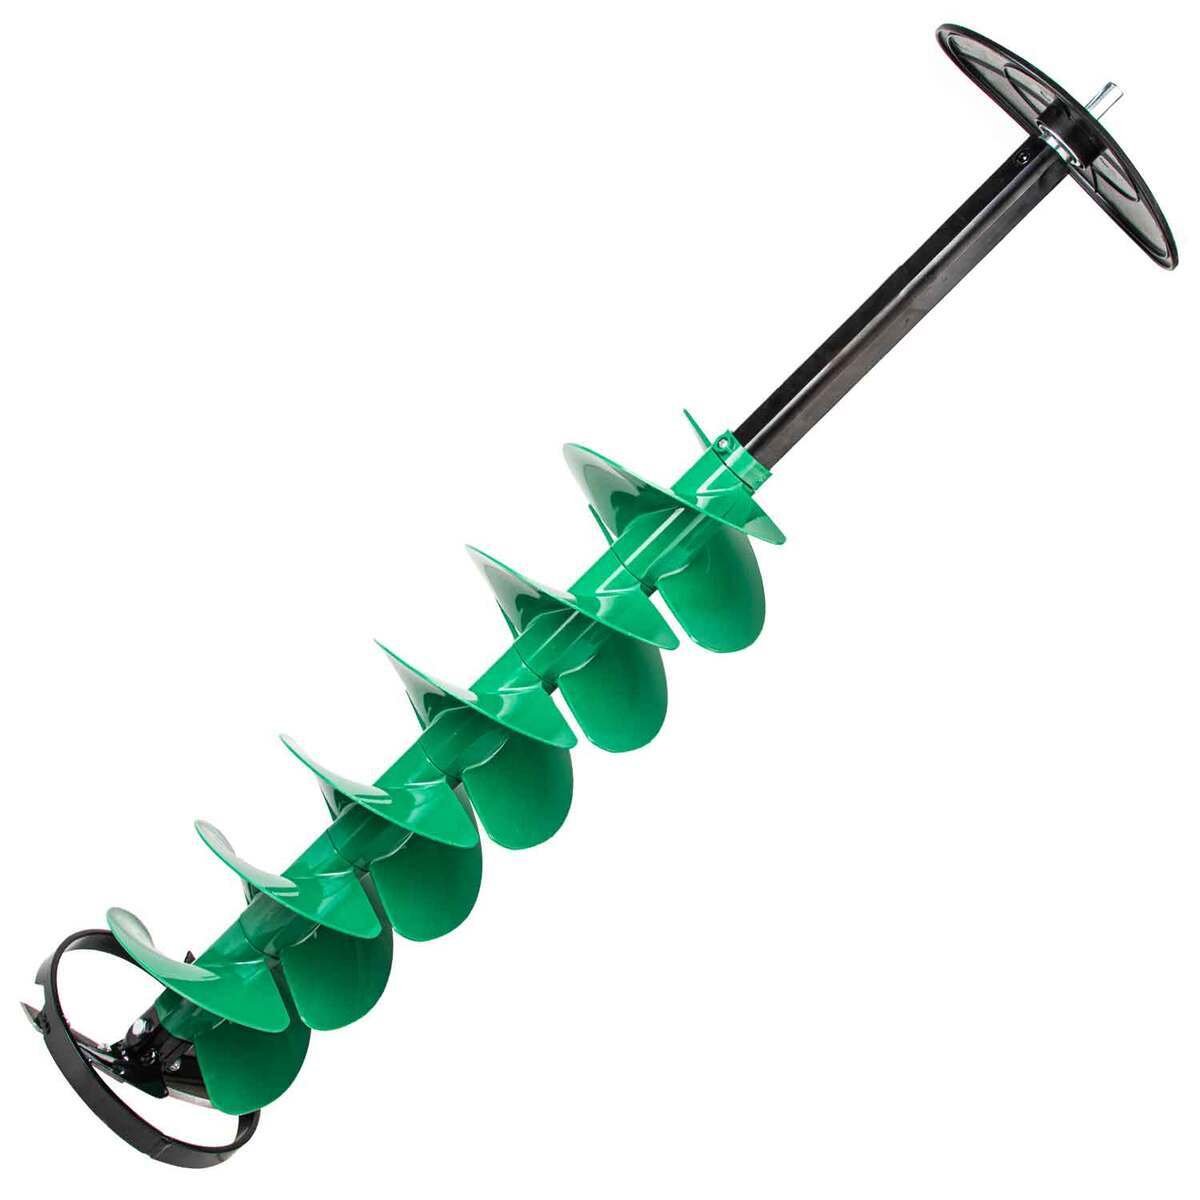 Lost Creek E-drill Nylon Ice Auger Bit Electric Power Ice Fishing Auger -  8in